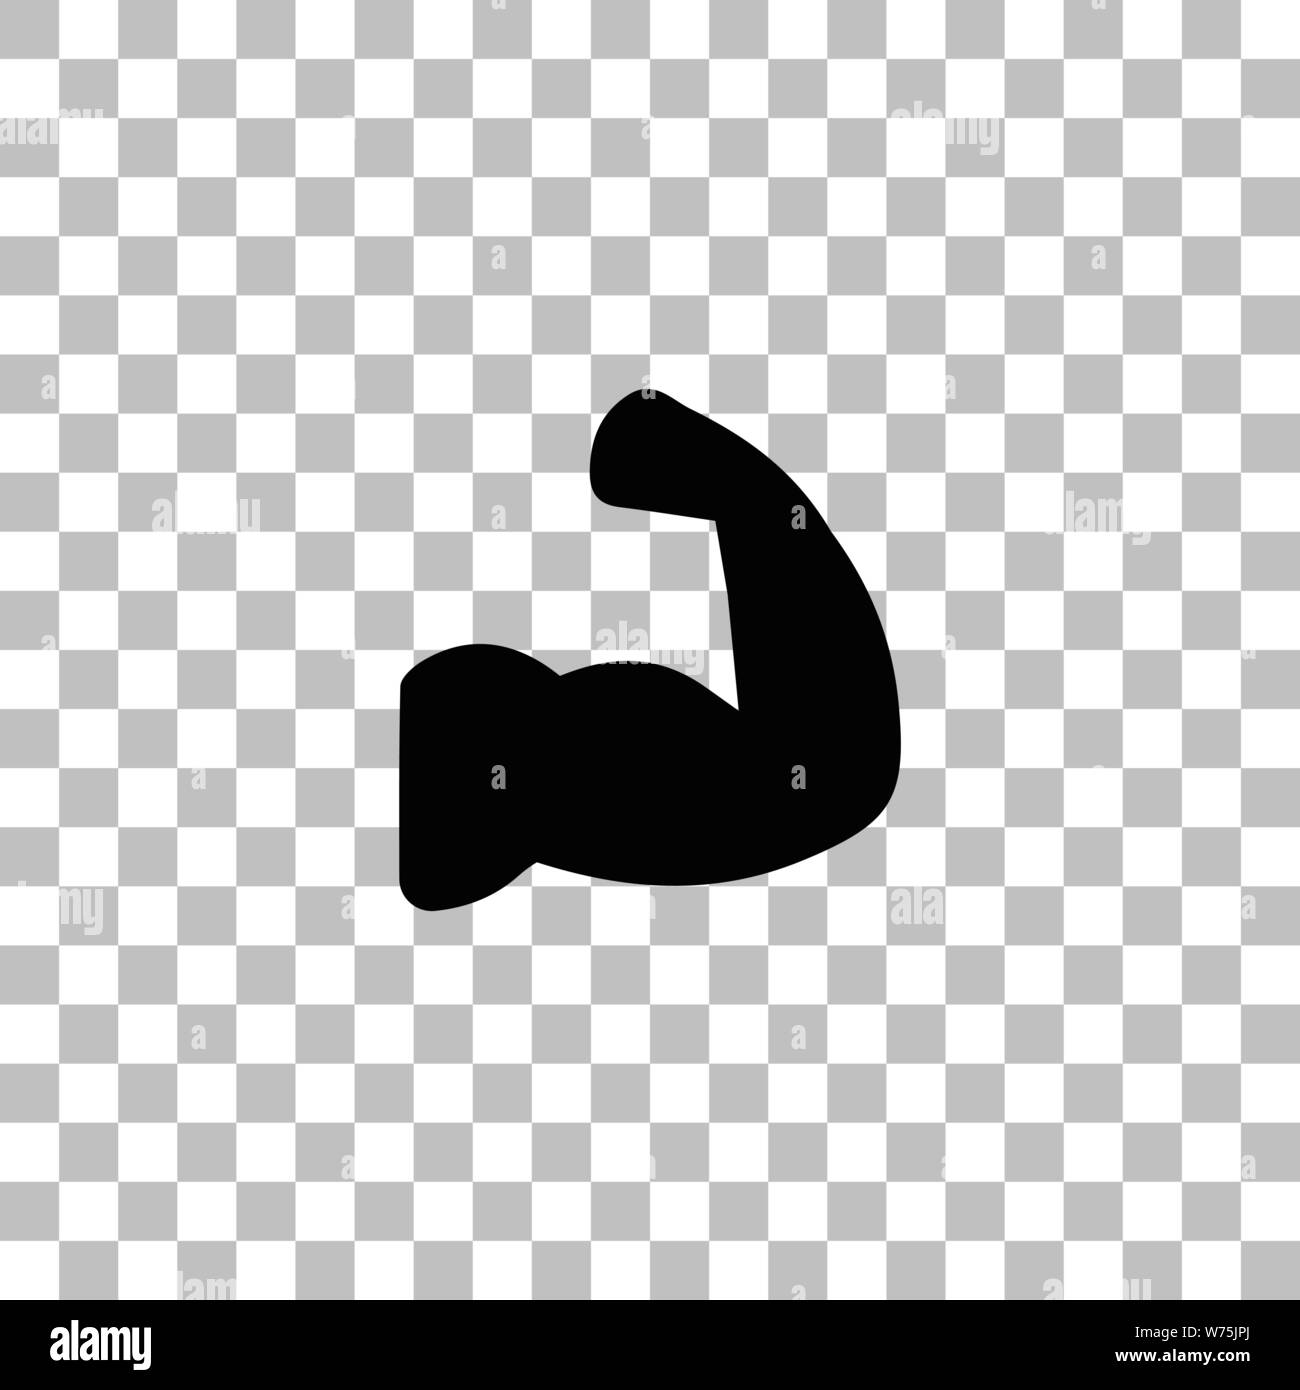 https://c8.alamy.com/comp/W75JPJ/strong-arm-black-flat-icon-on-a-transparent-background-pictogram-for-your-project-W75JPJ.jpg